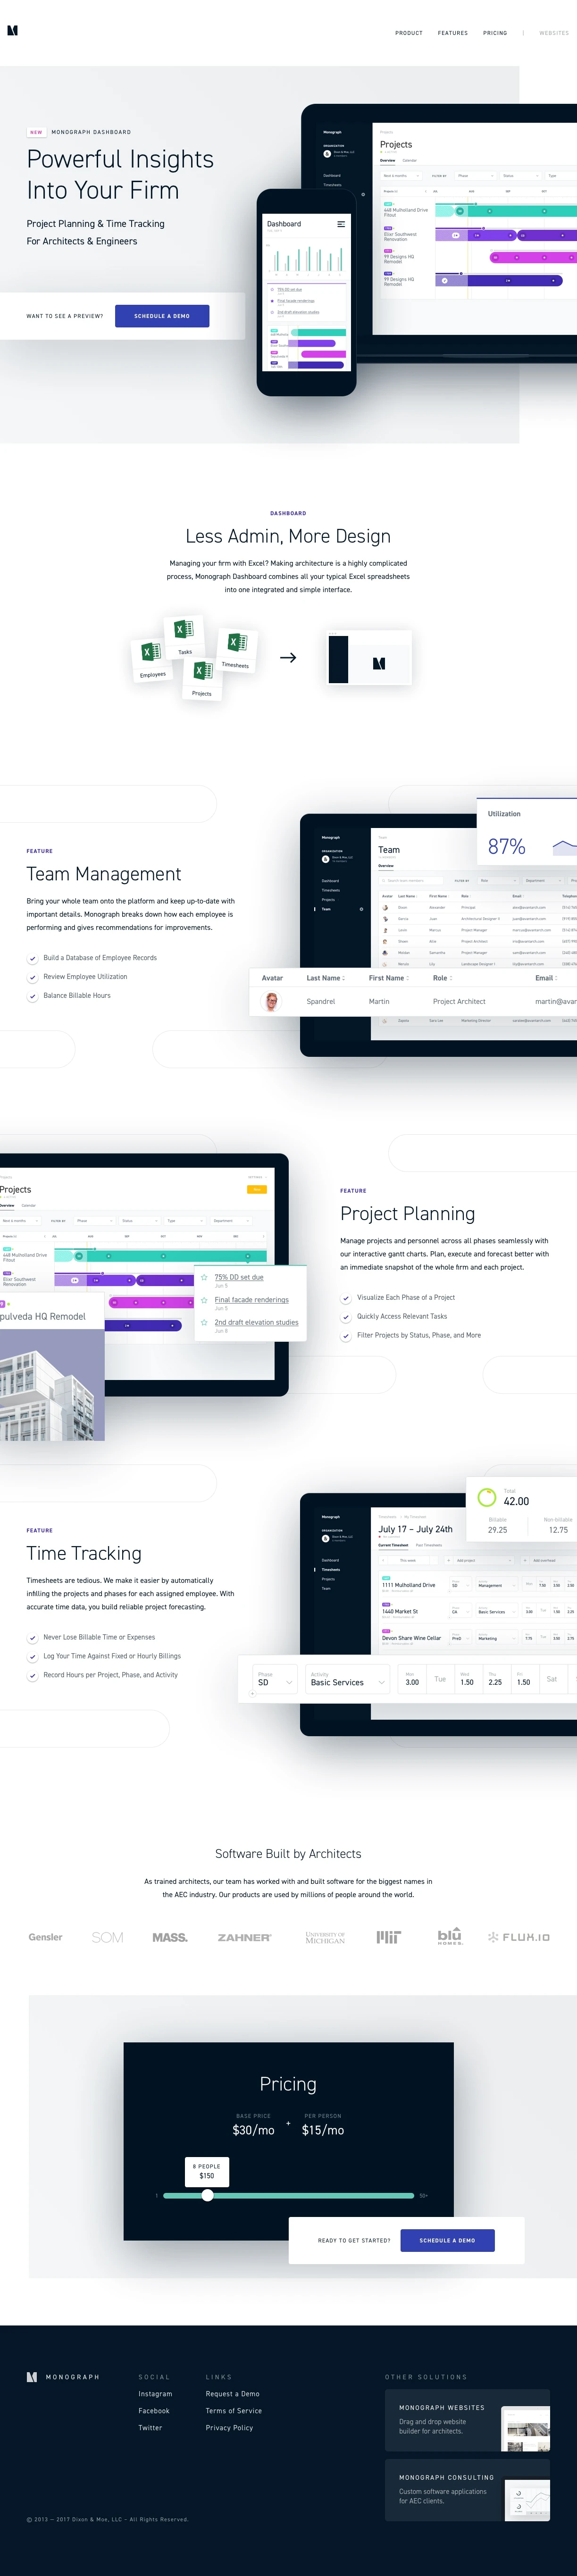 Monograph Landing Page Example: Monograph is project planning and time tracking software for architects and engineers.